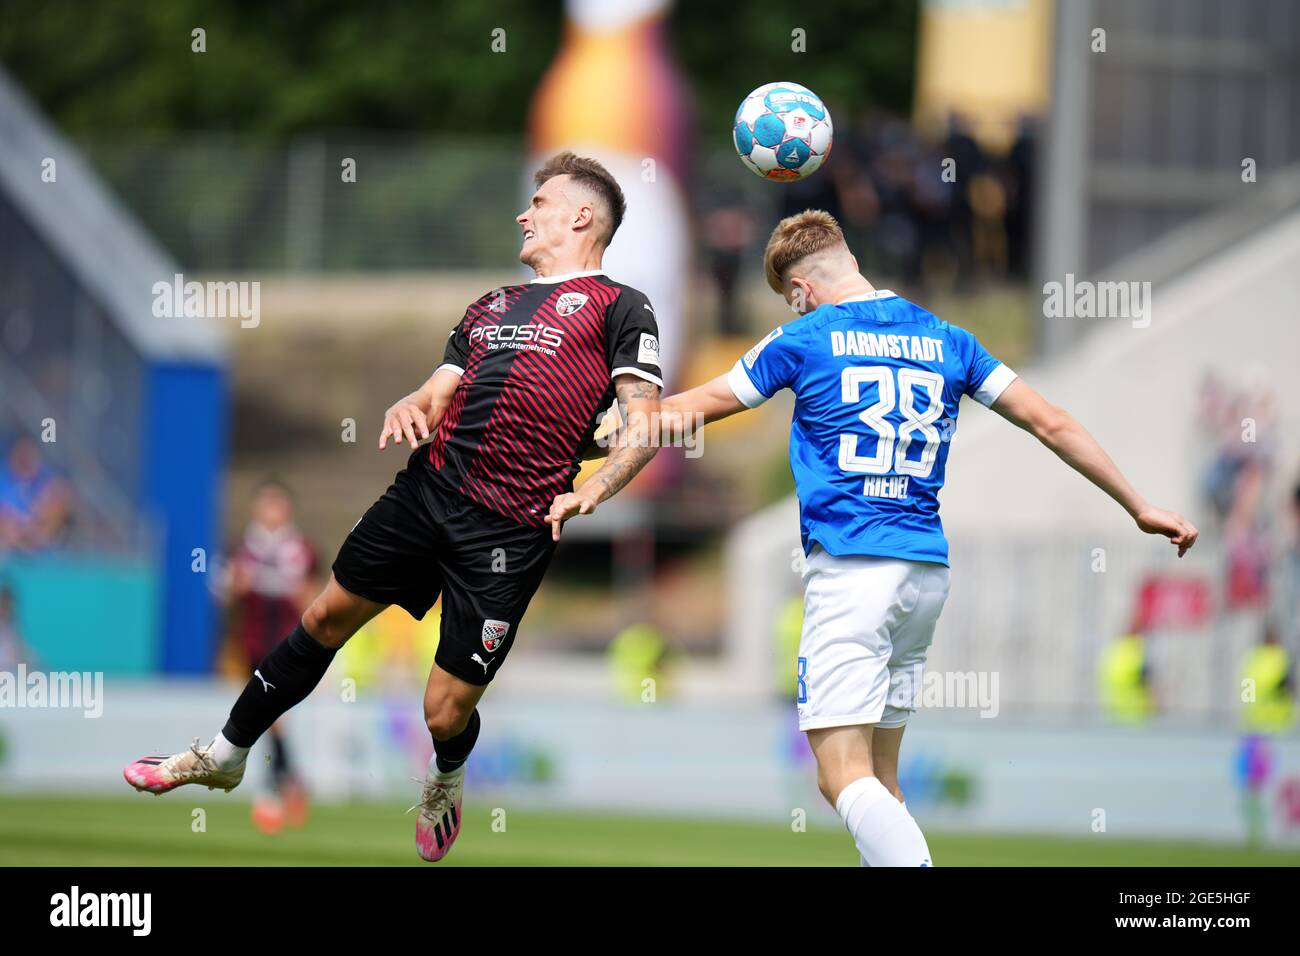 Darmstadt, Germany. 15th Aug, 2021. Football: 2nd Bundesliga, Darmstadt 98 - FC Ingolstadt 04, Matchday 3 at Merck-Stadion am Böllenfalltor. Ingolstadt's Dennis Eckert Ayensa (l) and Darmstadt's Clemens Riedel fight for the ball. Credit: Thomas Frey/dpa - IMPORTANT NOTE: In accordance with the regulations of the DFL Deutsche Fußball Liga and/or the DFB Deutscher Fußball-Bund, it is prohibited to use or have used photographs taken in the stadium and/or of the match in the form of sequence pictures and/or video-like photo series./dpa/Alamy Live News Stock Photo